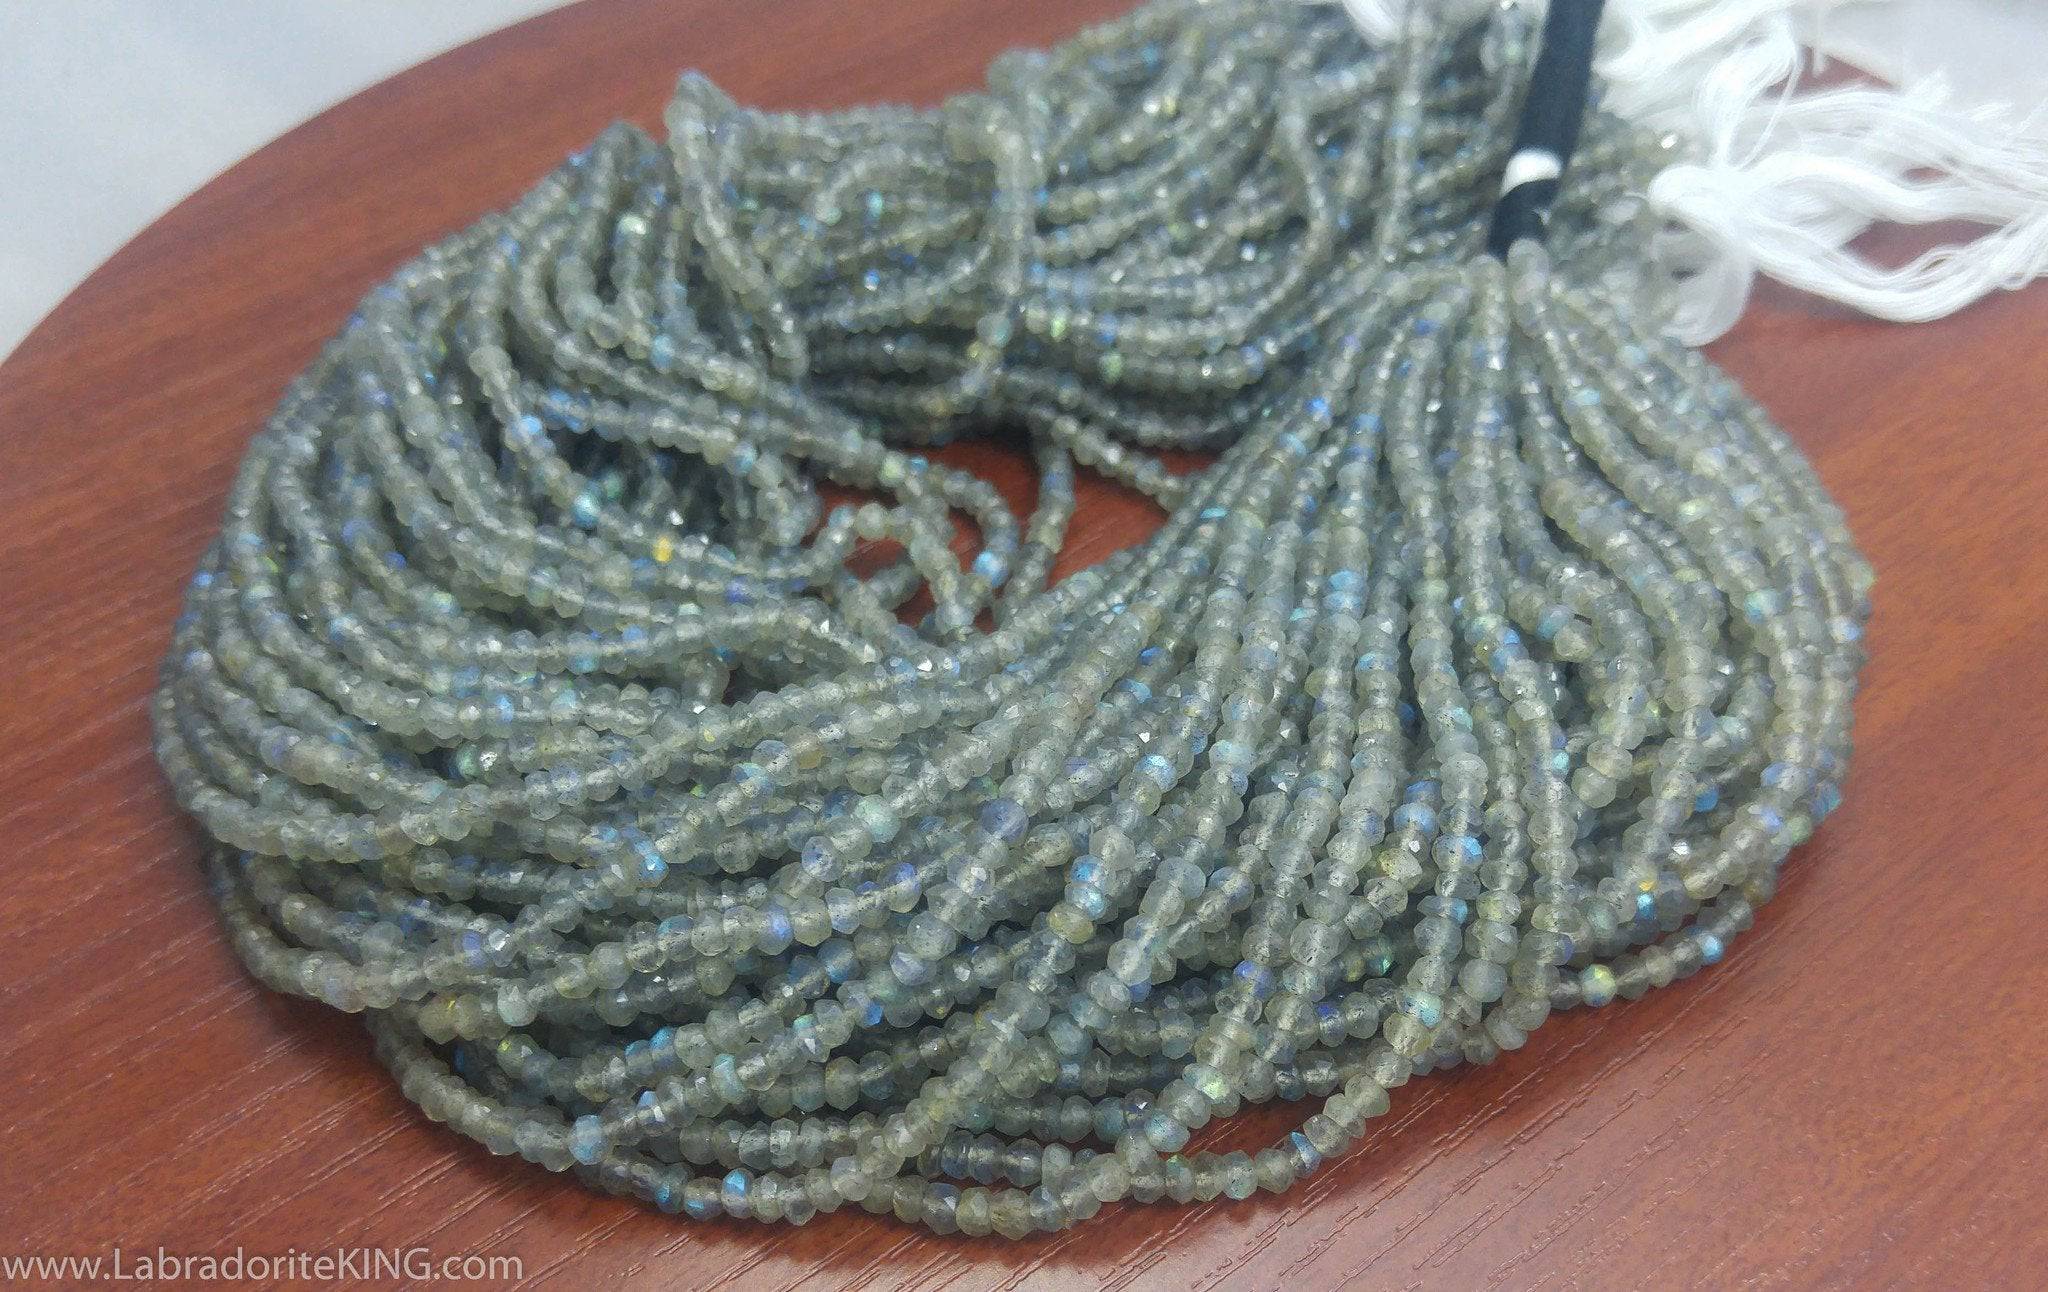 Natural Labradorite 4mm faceted Beads 14" Inches beads, Rondelles Beads - The LabradoriteKing